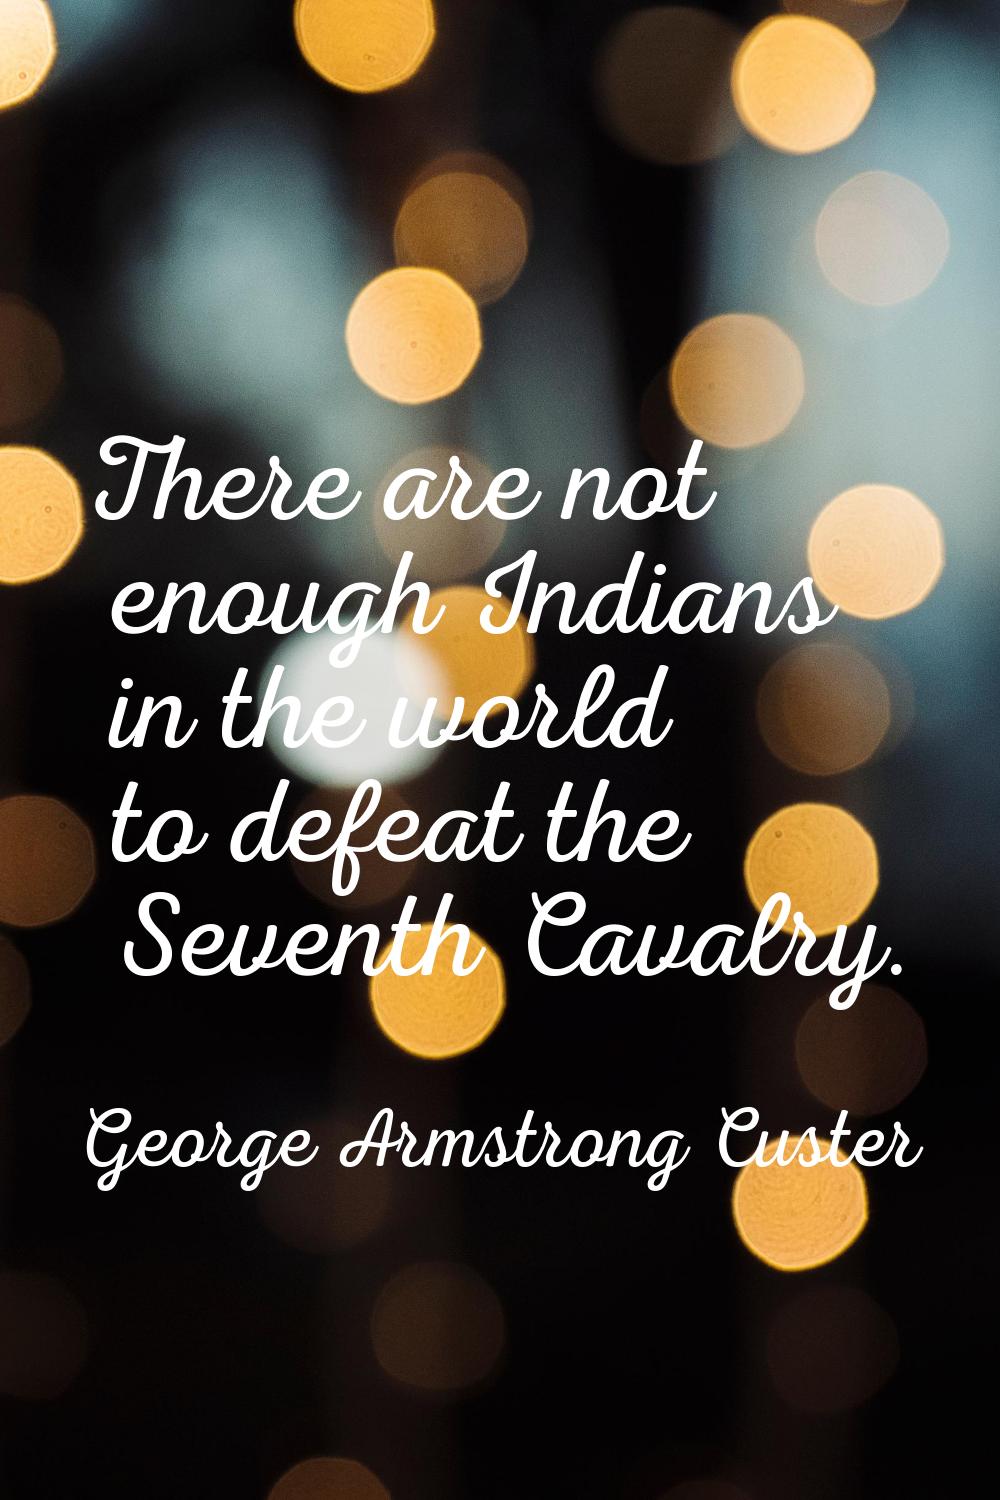 There are not enough Indians in the world to defeat the Seventh Cavalry.